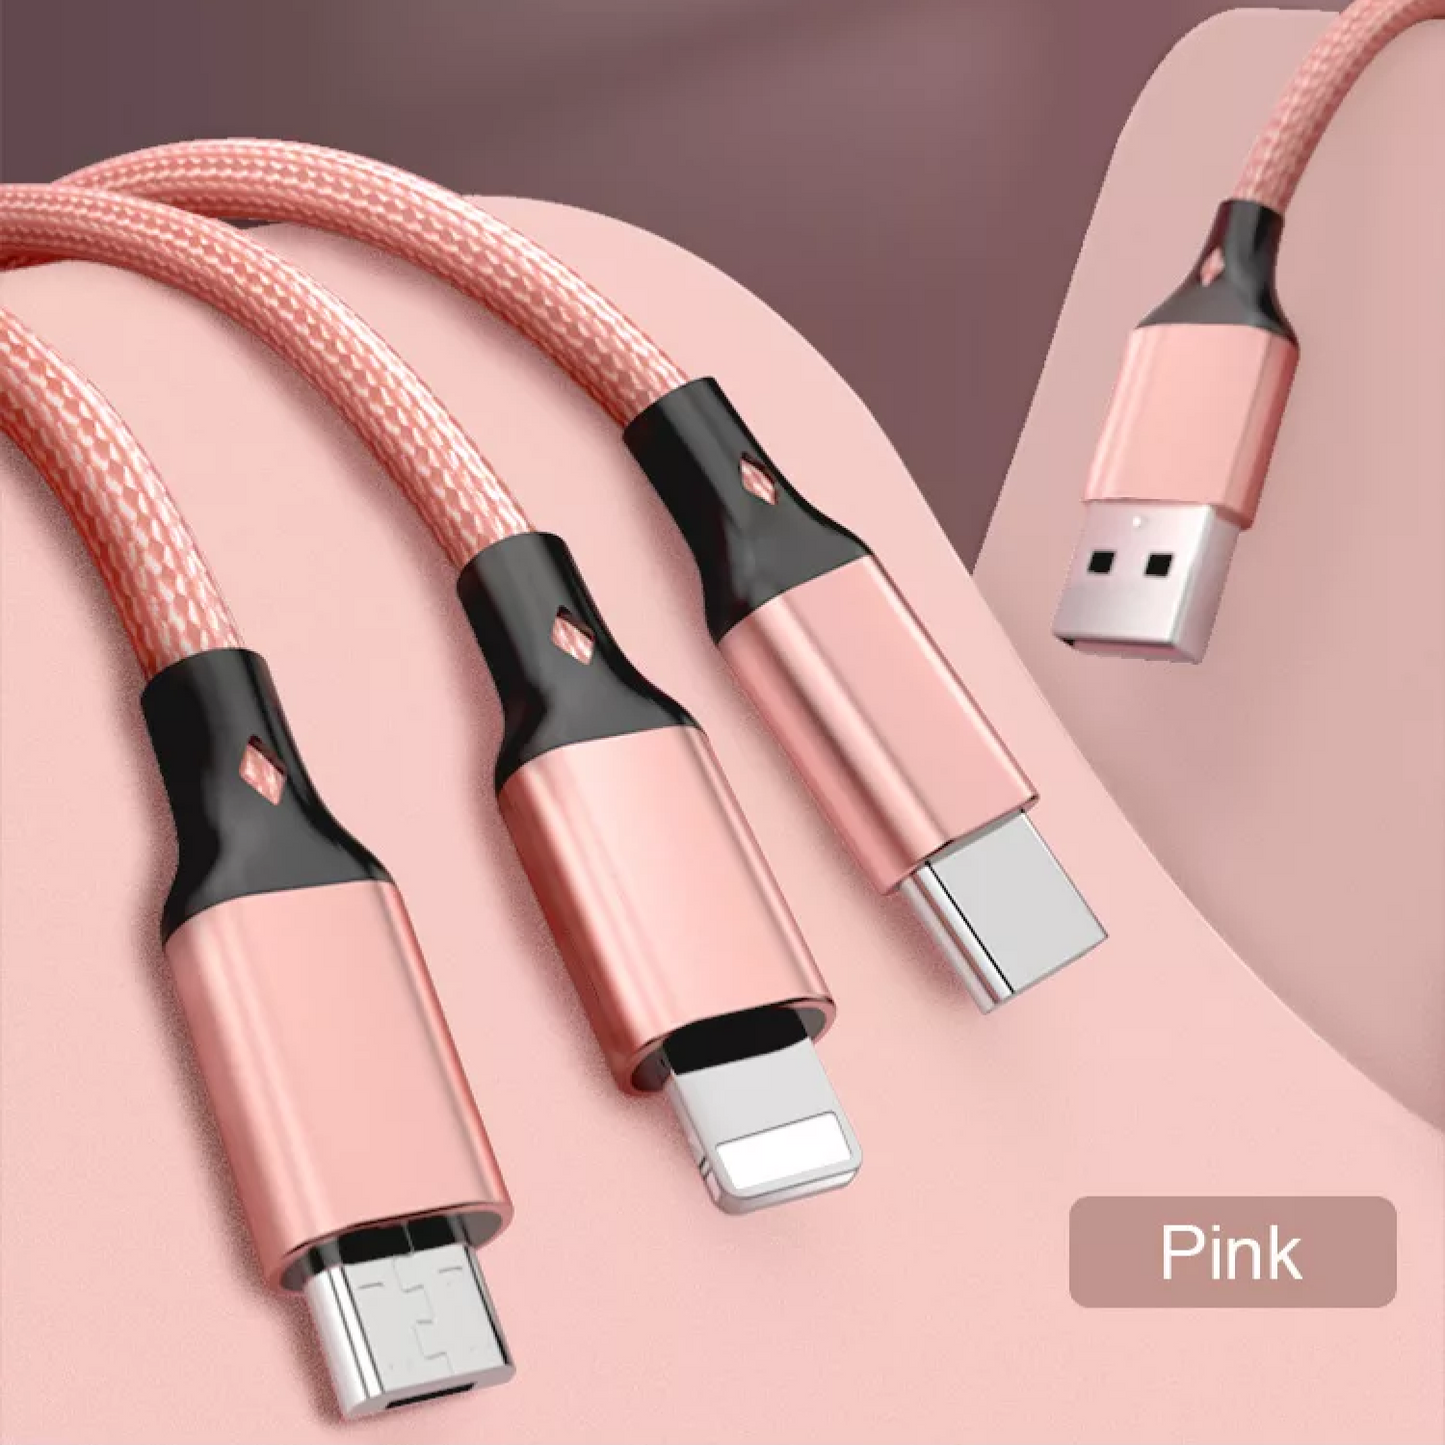 K - Nylon braid Mobile Micro 1.2M USB Cable 3 in 1 Phone Charging Cable